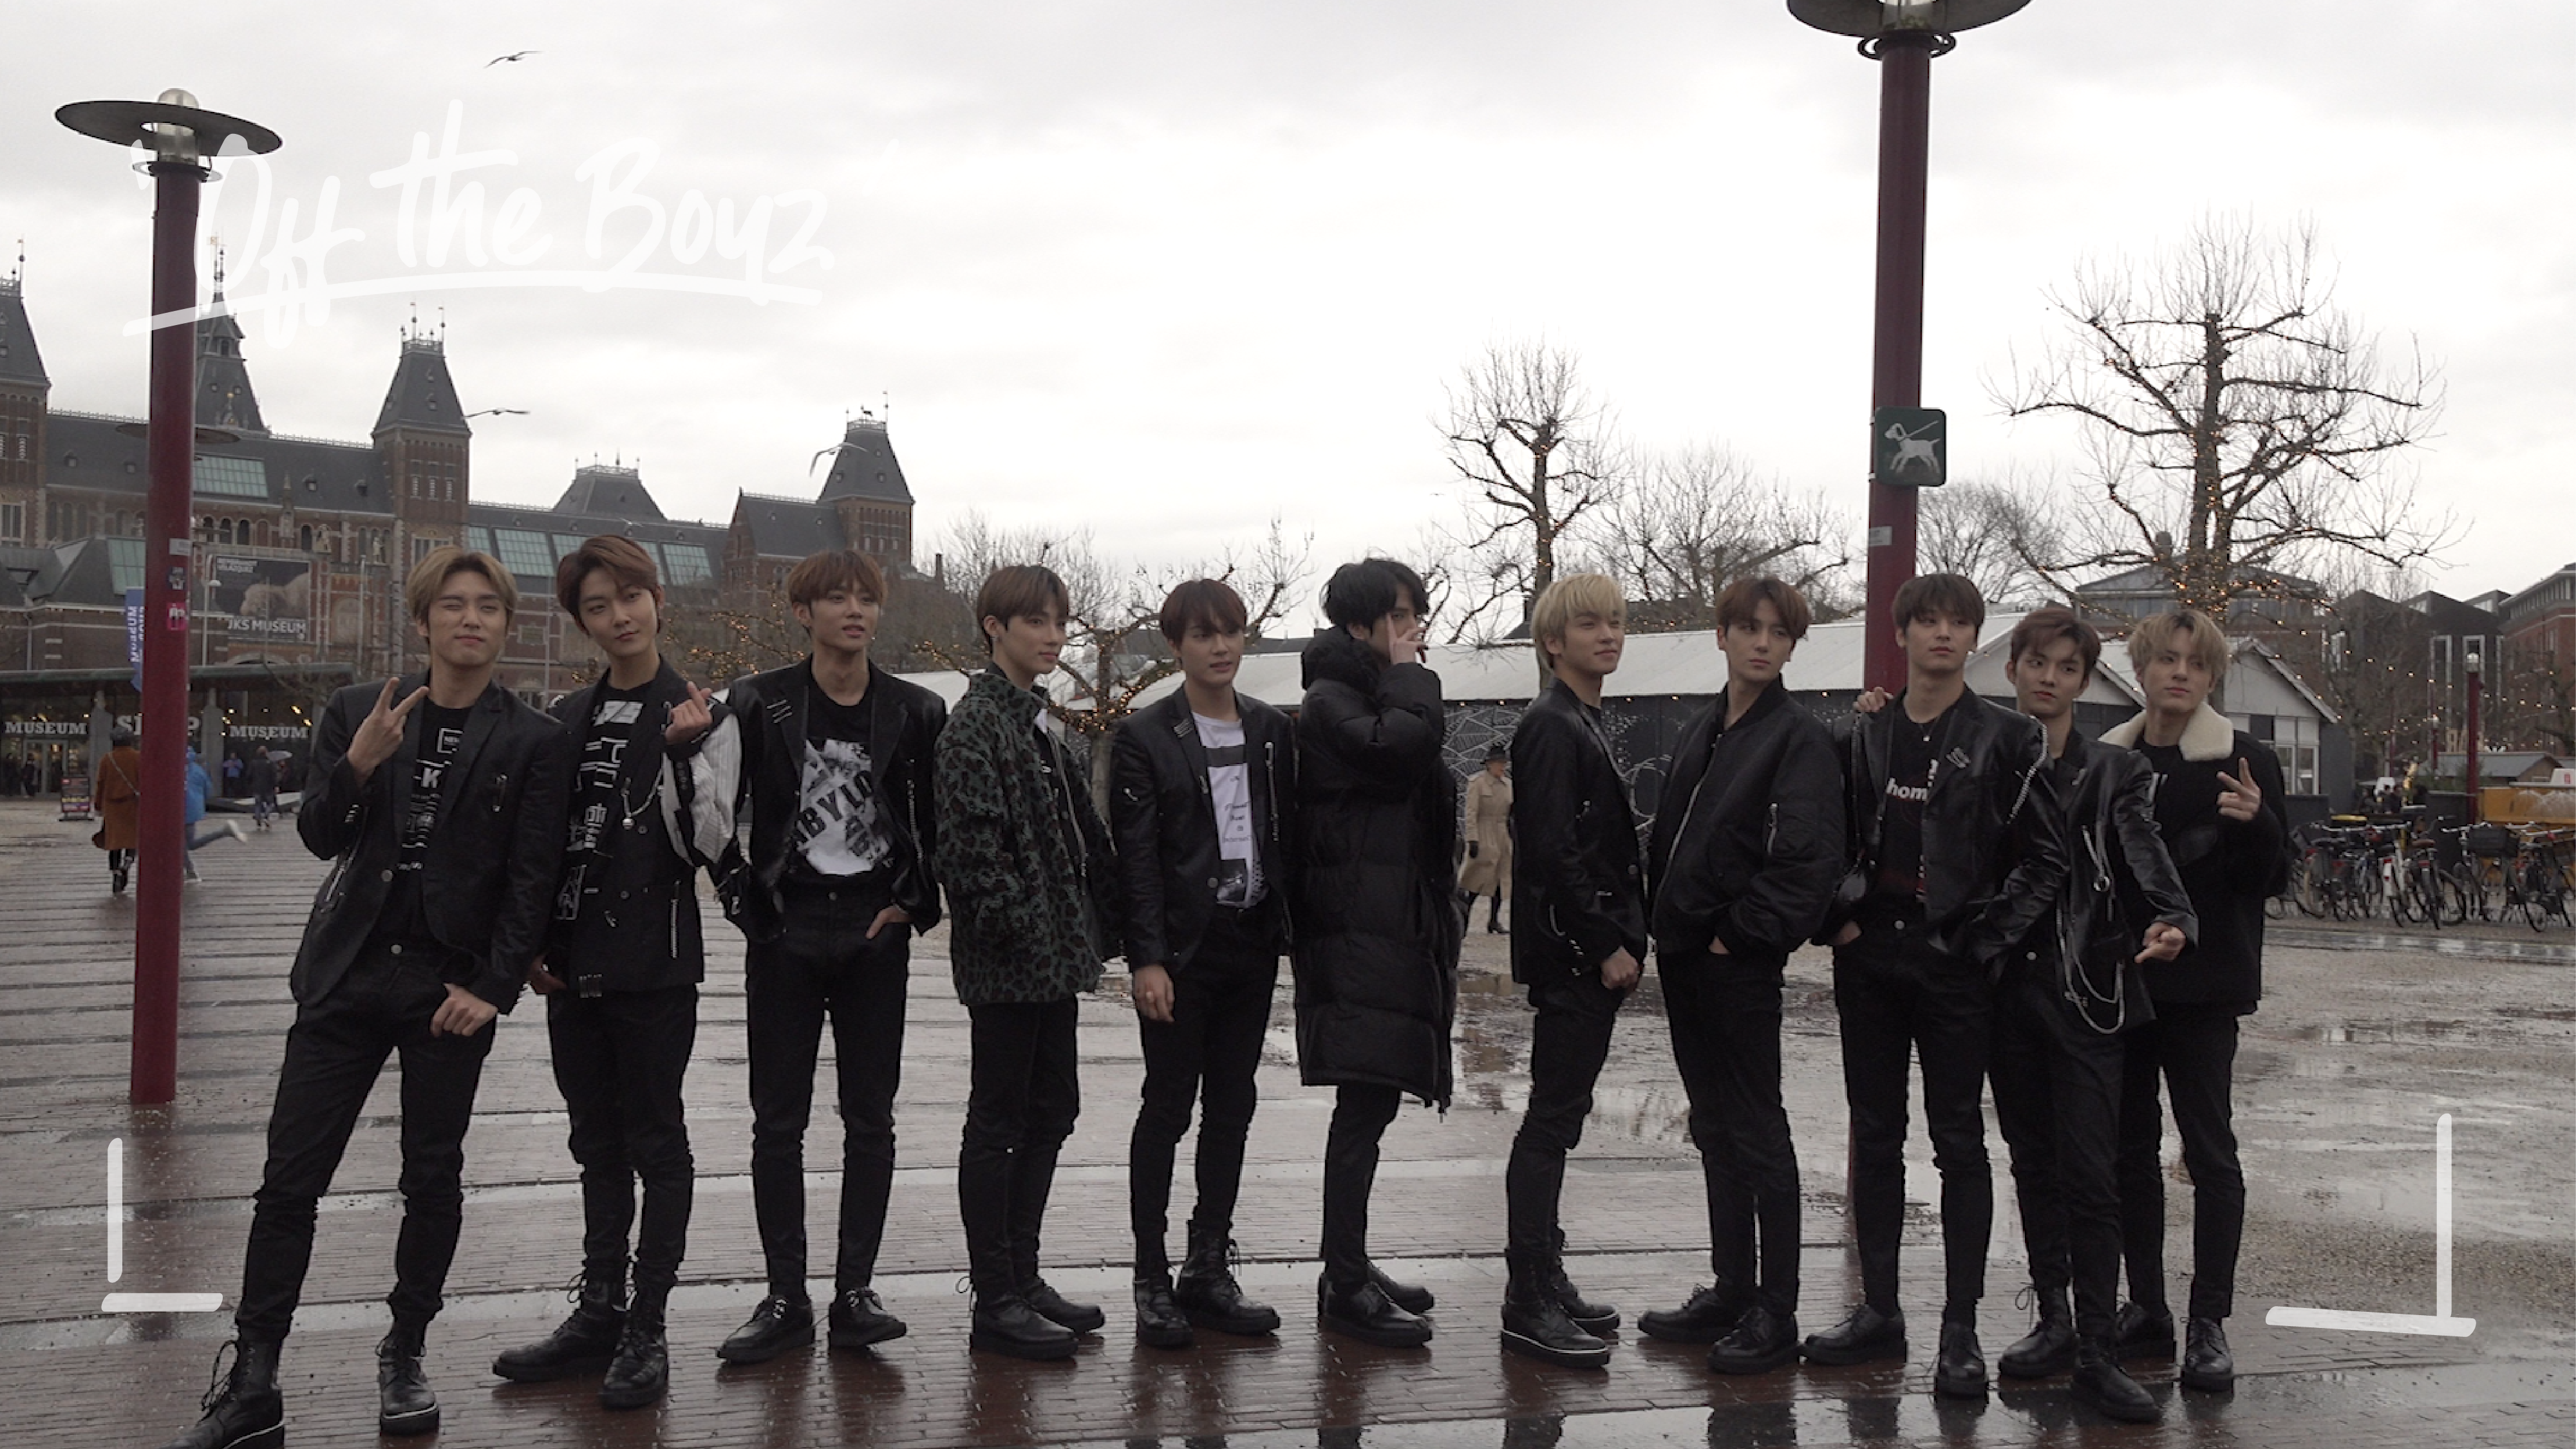 [OFF THE BOYZ] EUROPE TOUR IN AMSTERDAM Behind